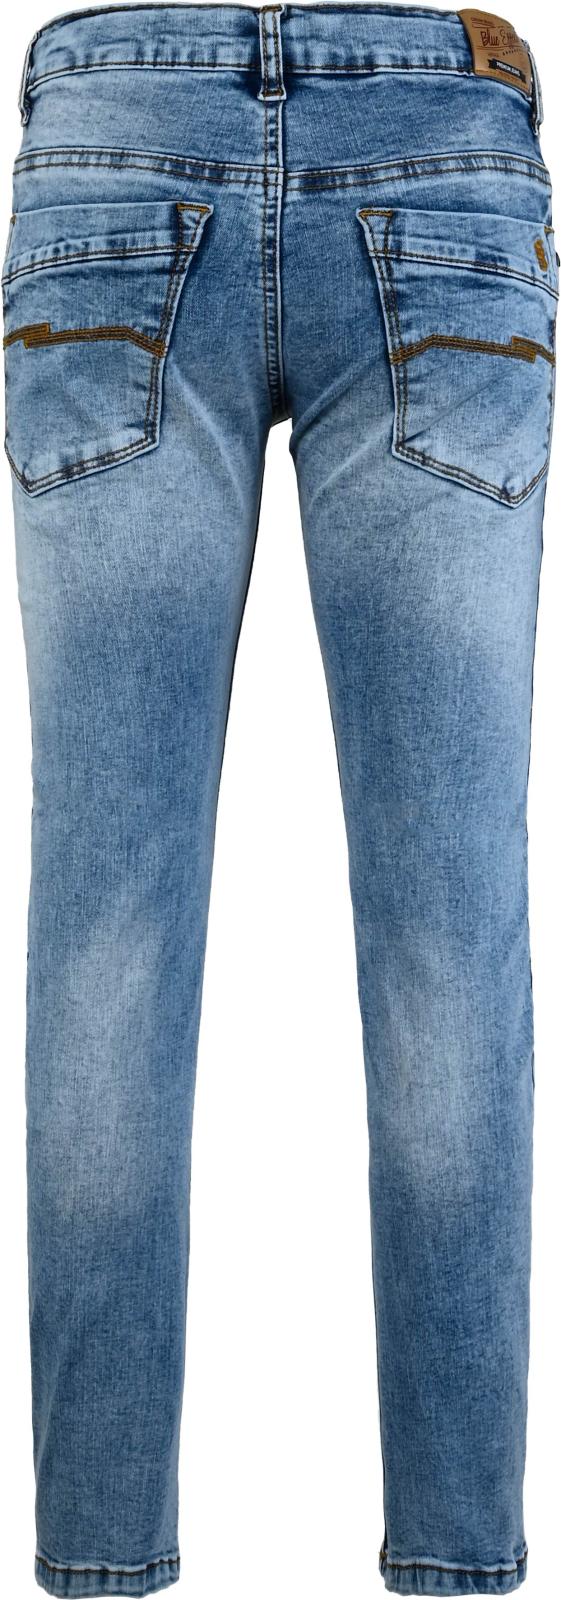 Jungen Jeans 2231-2833 Relaxed Fit Jeans Medium Blue